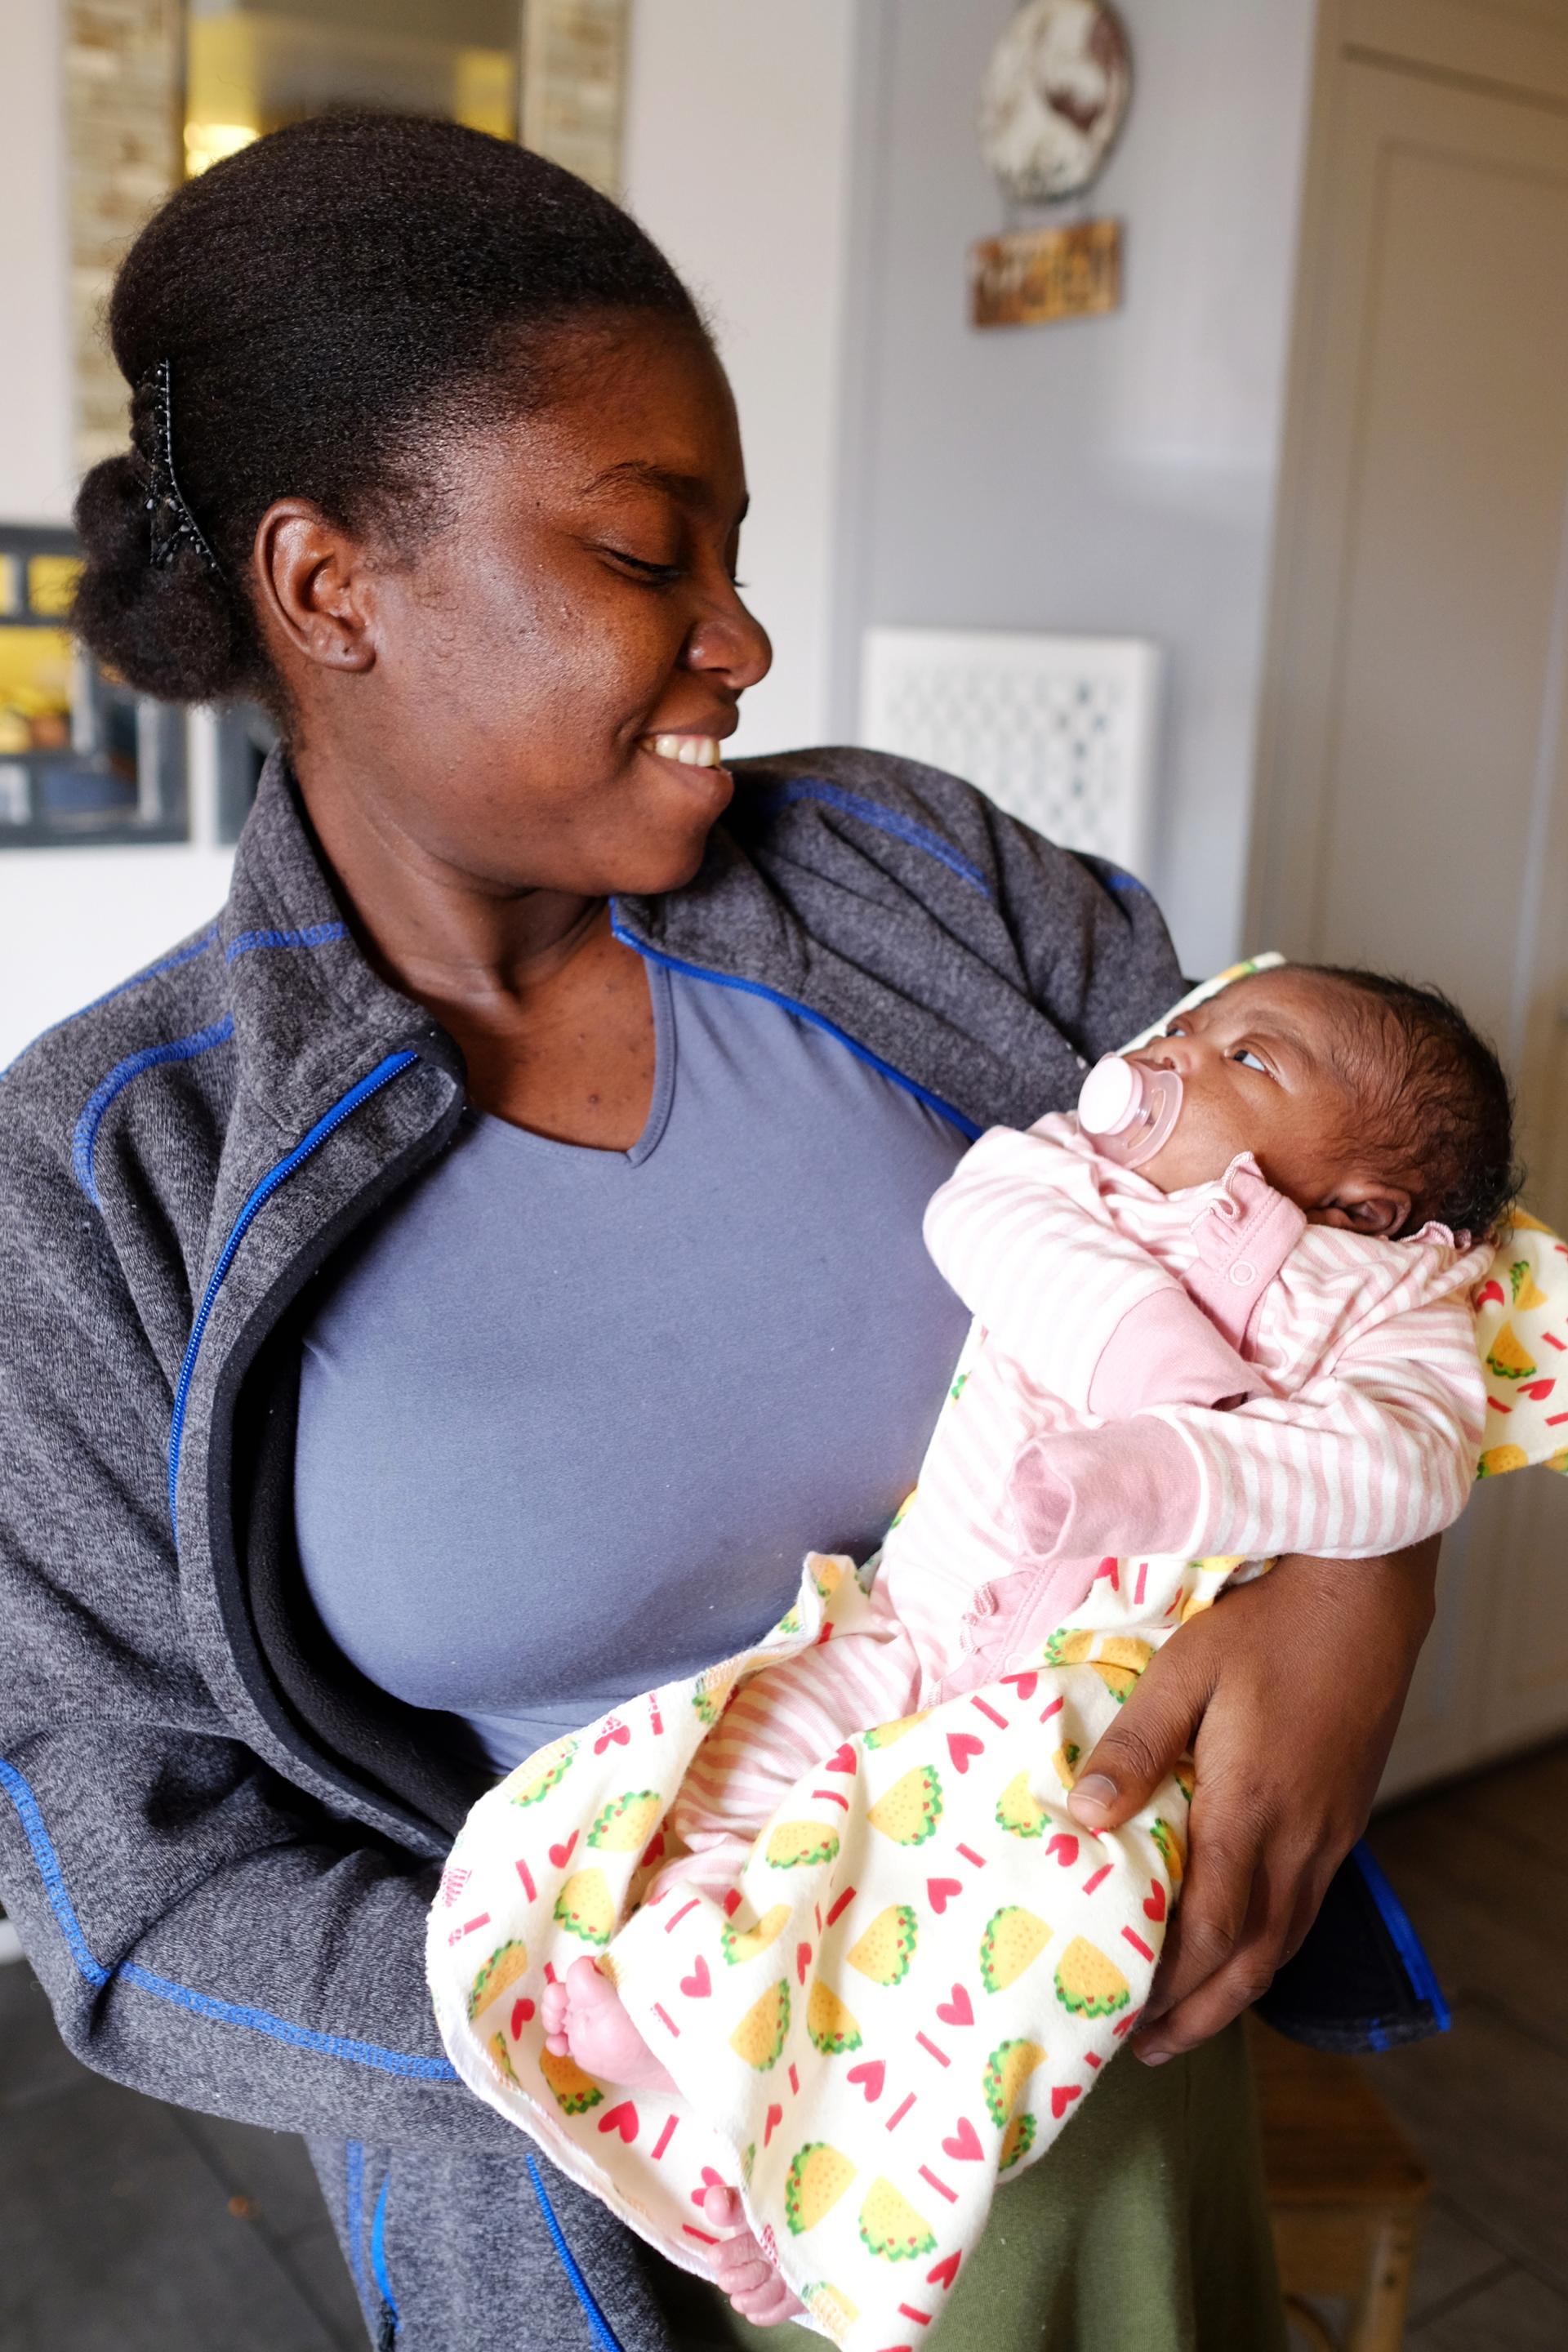 Dieula Sainvil holds her newborn baby at a shelter in the west Phoenix area where she's staying.